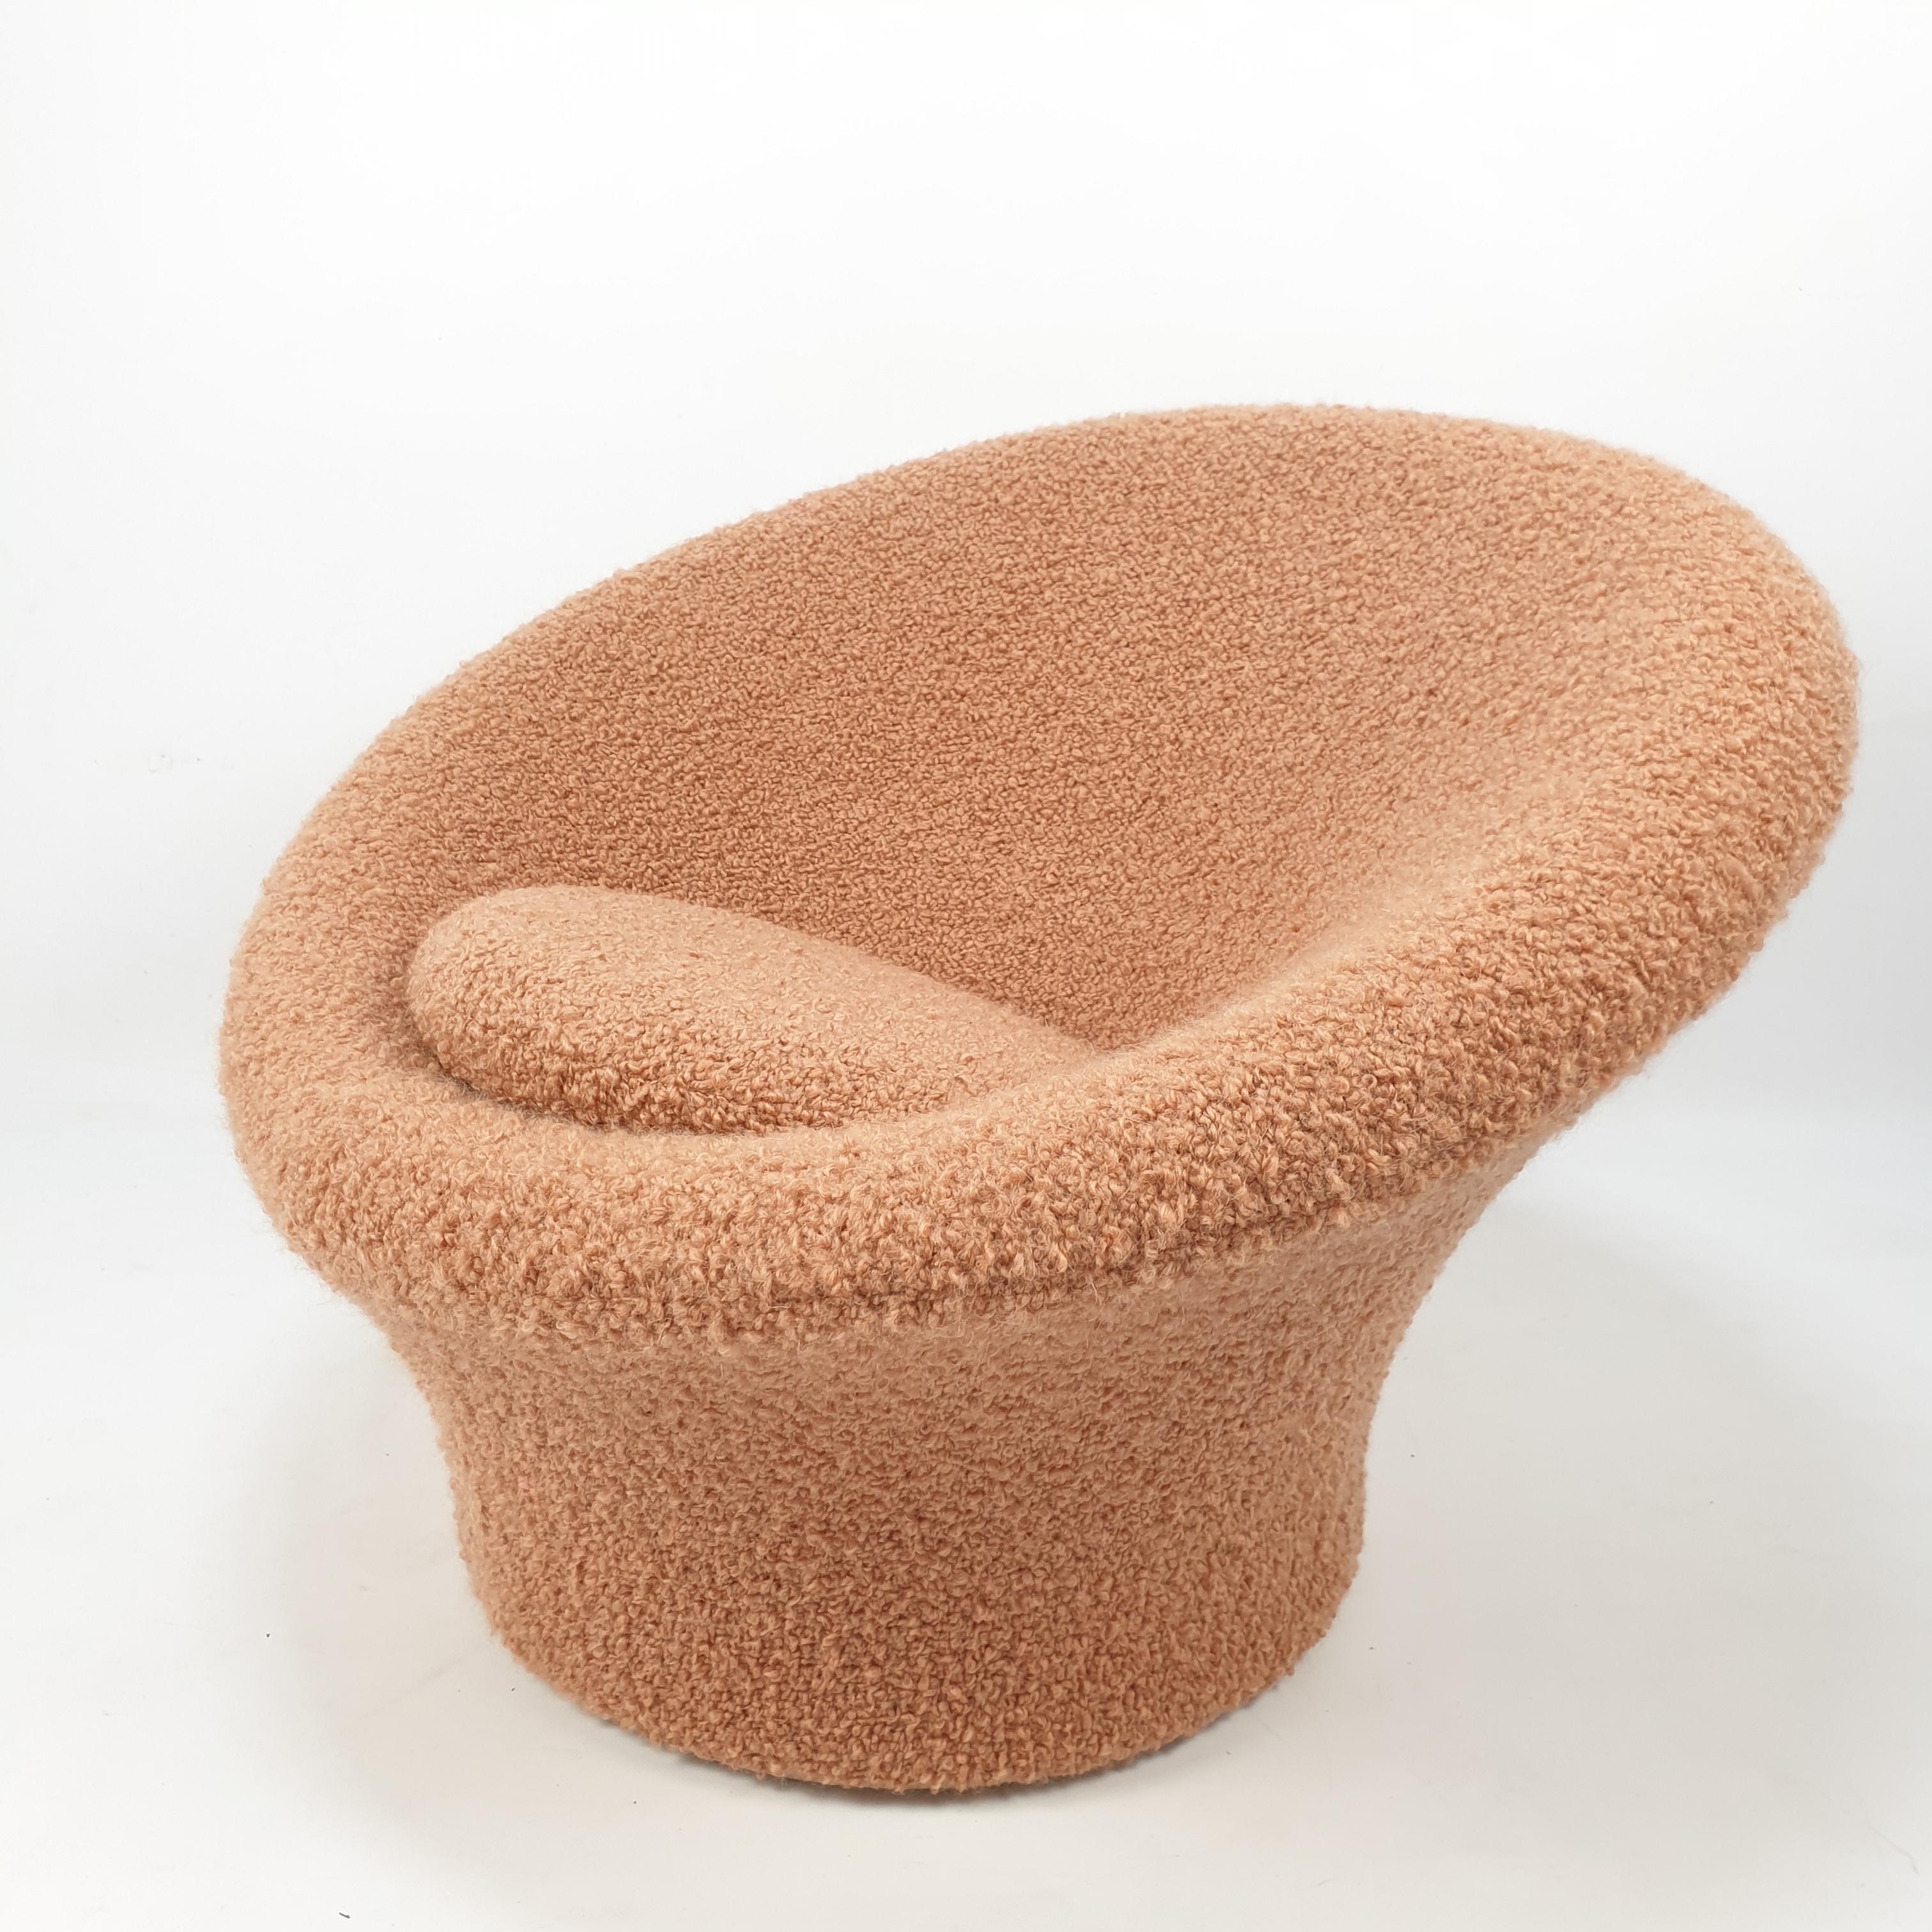 Very comfortable and cosy Artifort mushroom set, designed by Pierre Paulin in the 60’s. Covered with stunning and high quality French Pierre Frey bouclé fabric with Mohair and Alpaca wool, color Pesca. The chair and pouf are completely restored by a